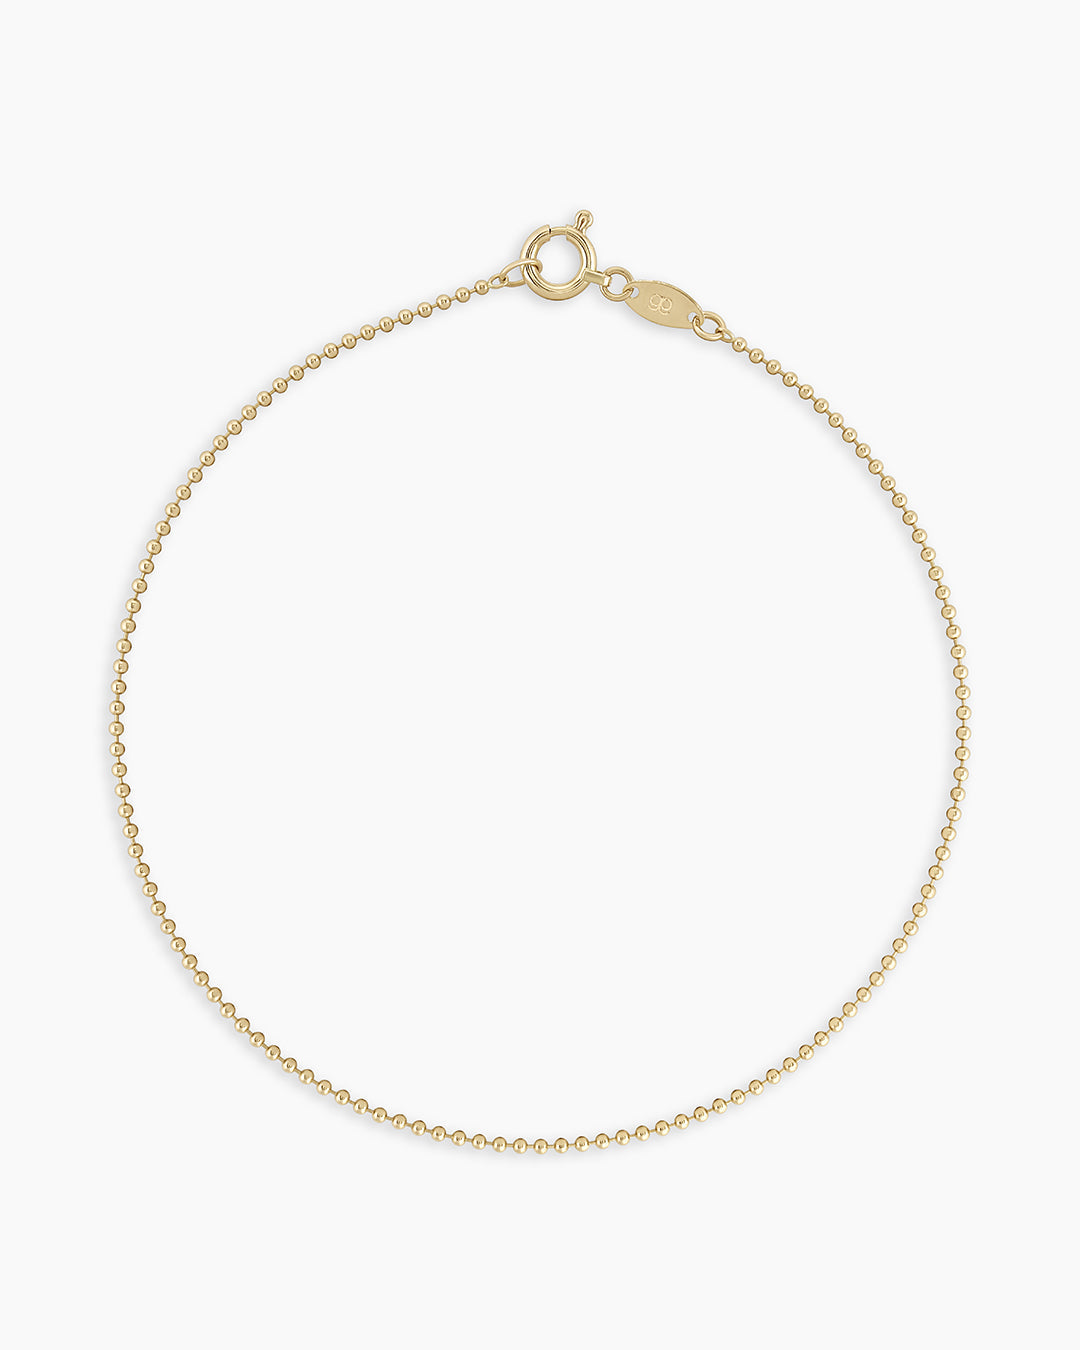 Gold Stainless Steel Cuban Link Chain Bracelet - Mahtani Jewelers